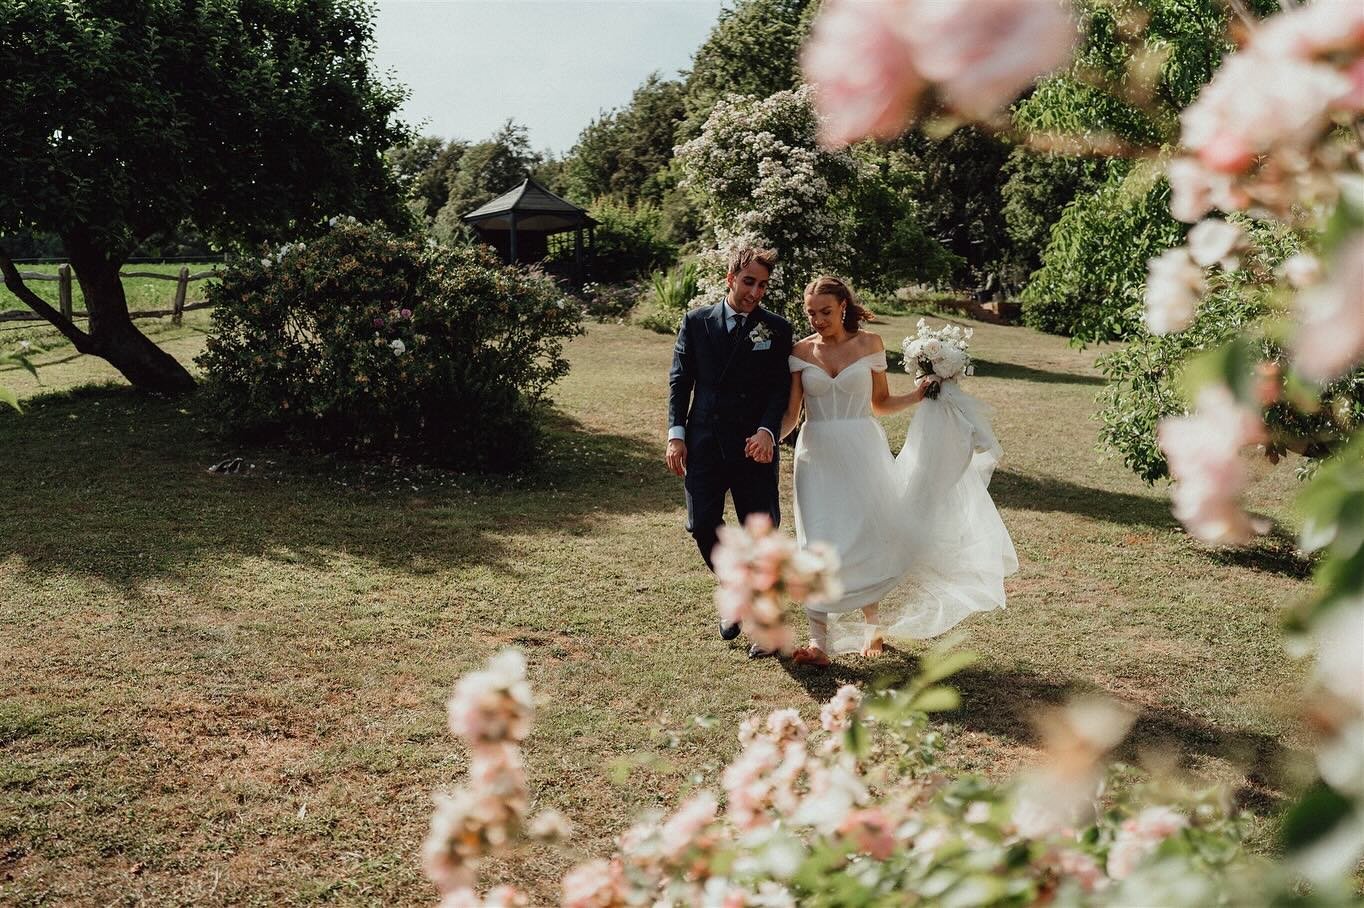 Are you even a wedding photographer if you don&rsquo;t try and frame a couple in nature 🫢🌸